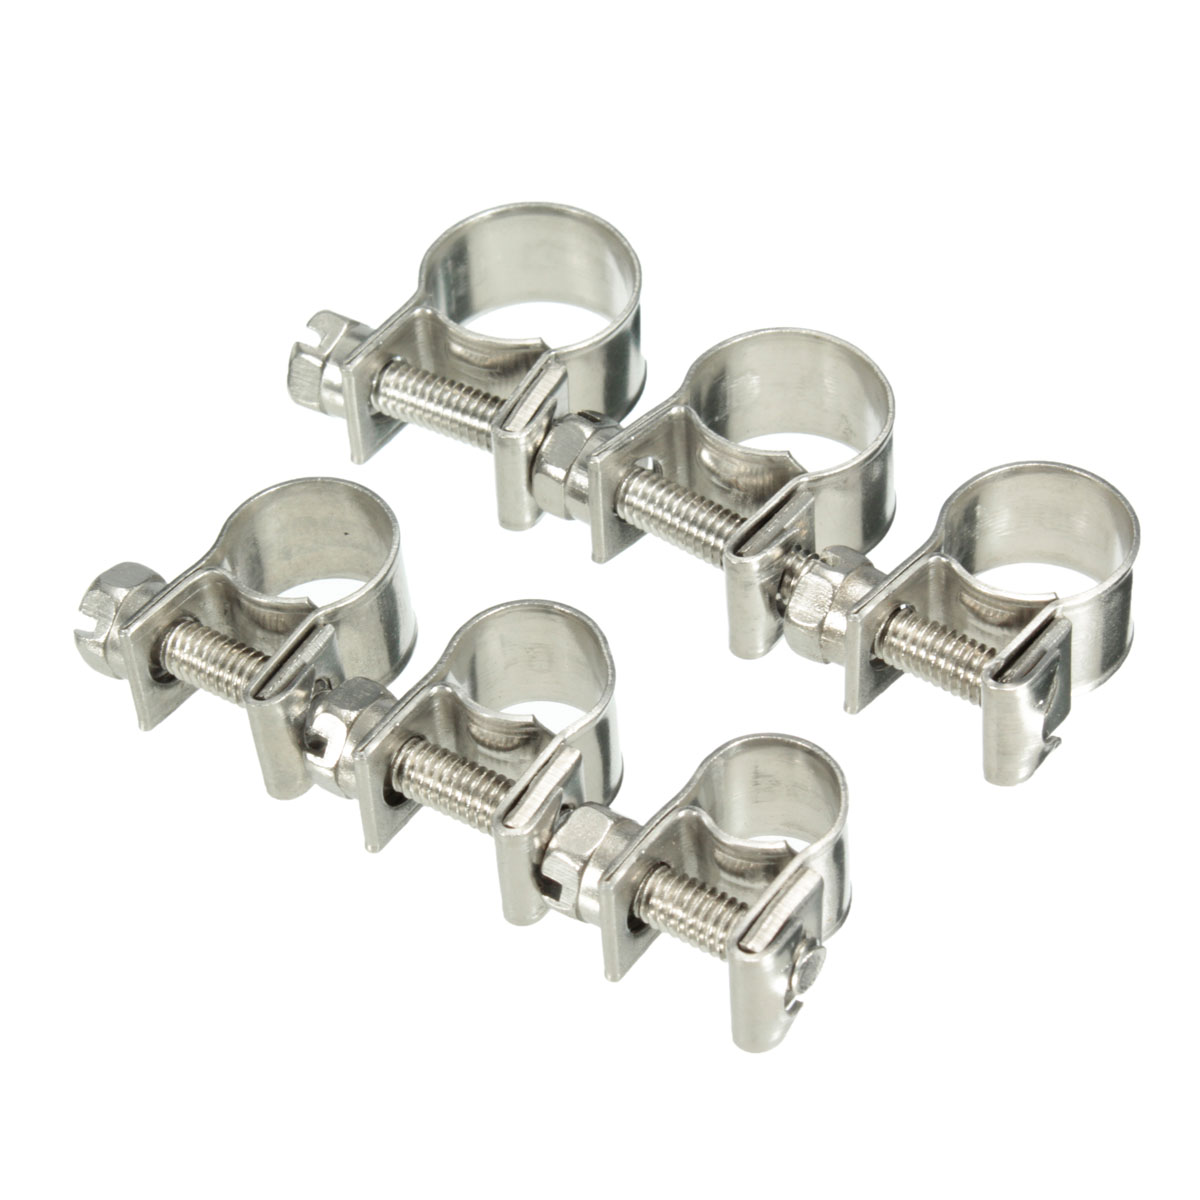 10 Pcs 5/16" Solid Band 13-15 MM Fuel Injection & Gas Line Hose Clamps Pipe Clip